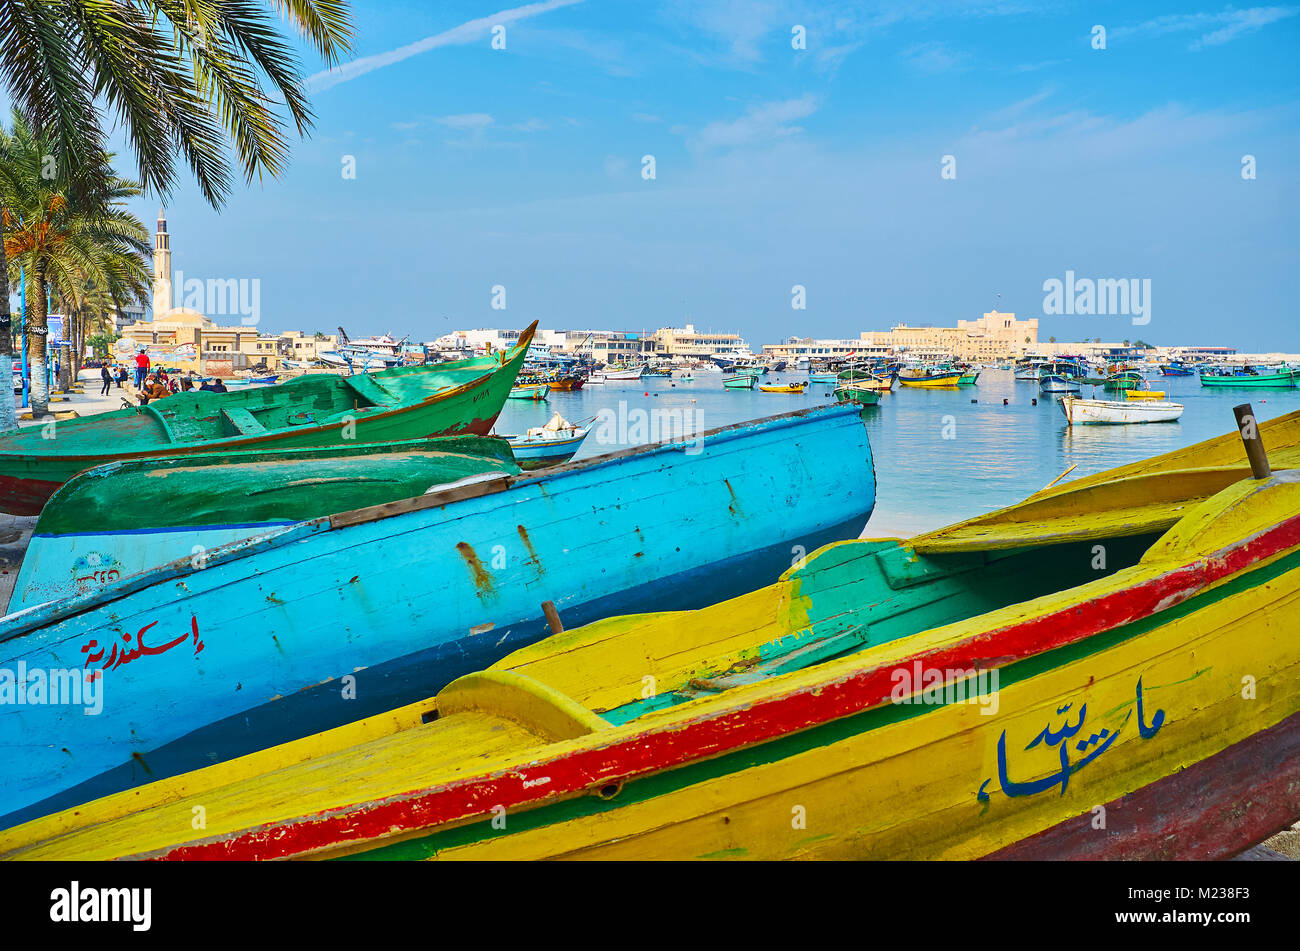 ALEXANDRIA, EGYPT - DECEMBER 17, 2017: The colored fishing  boats stands along the Corniche promenade, the Eastern harbor and Qaitbay citadel are seen Stock Photo